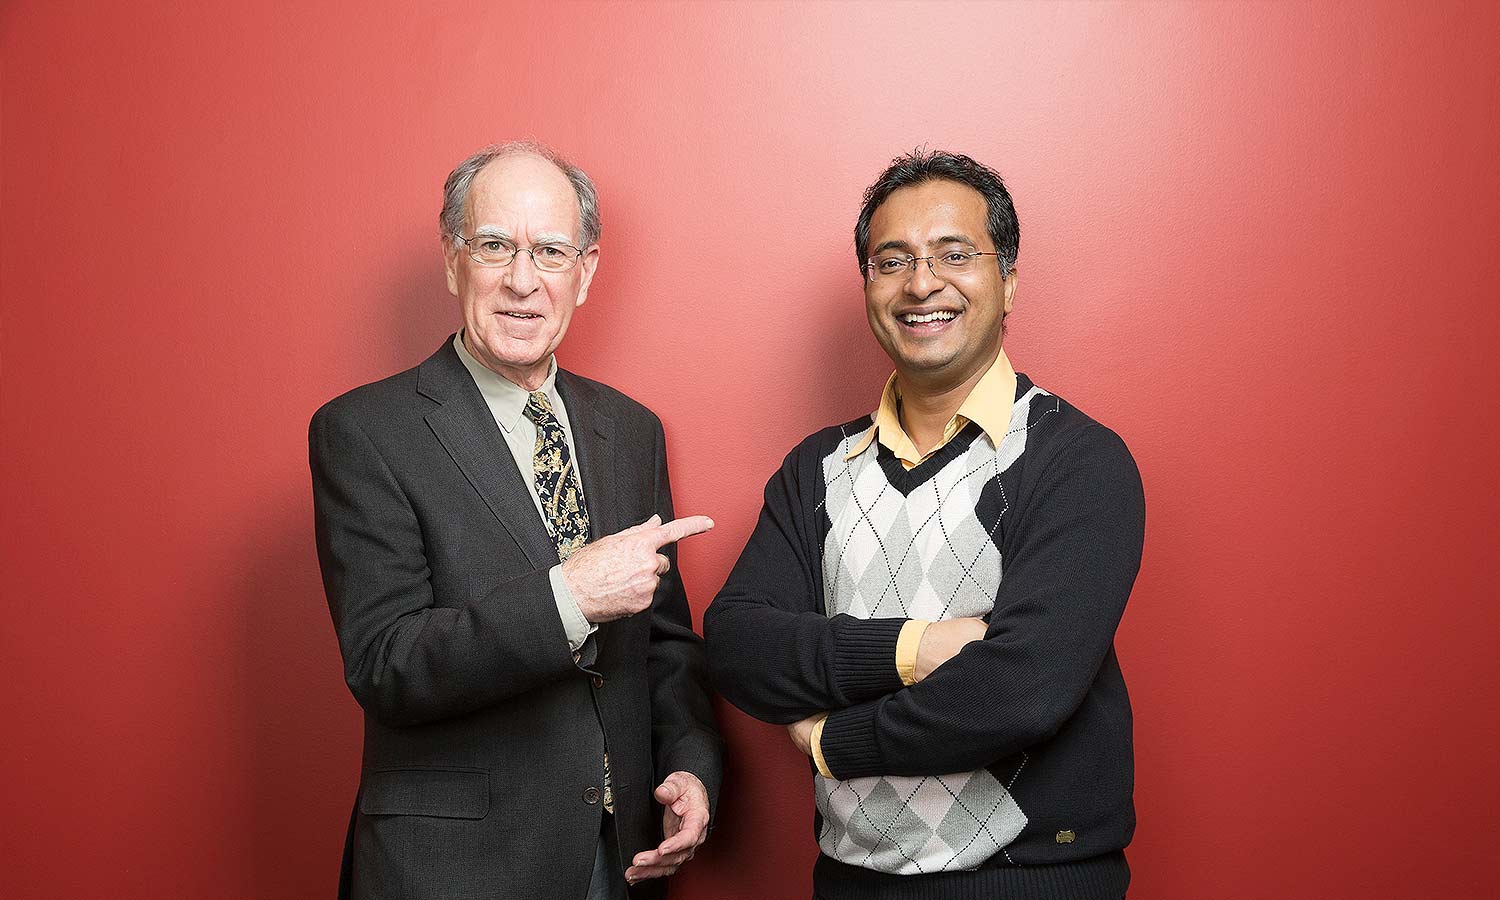 Dean David Cameron of the Faculty of Arts & Science (left) and Jaby Mathew, recipient of the 2013 Robert C. Vipond Graduate Scholarship in Political Science, to which Cameron is a donor.